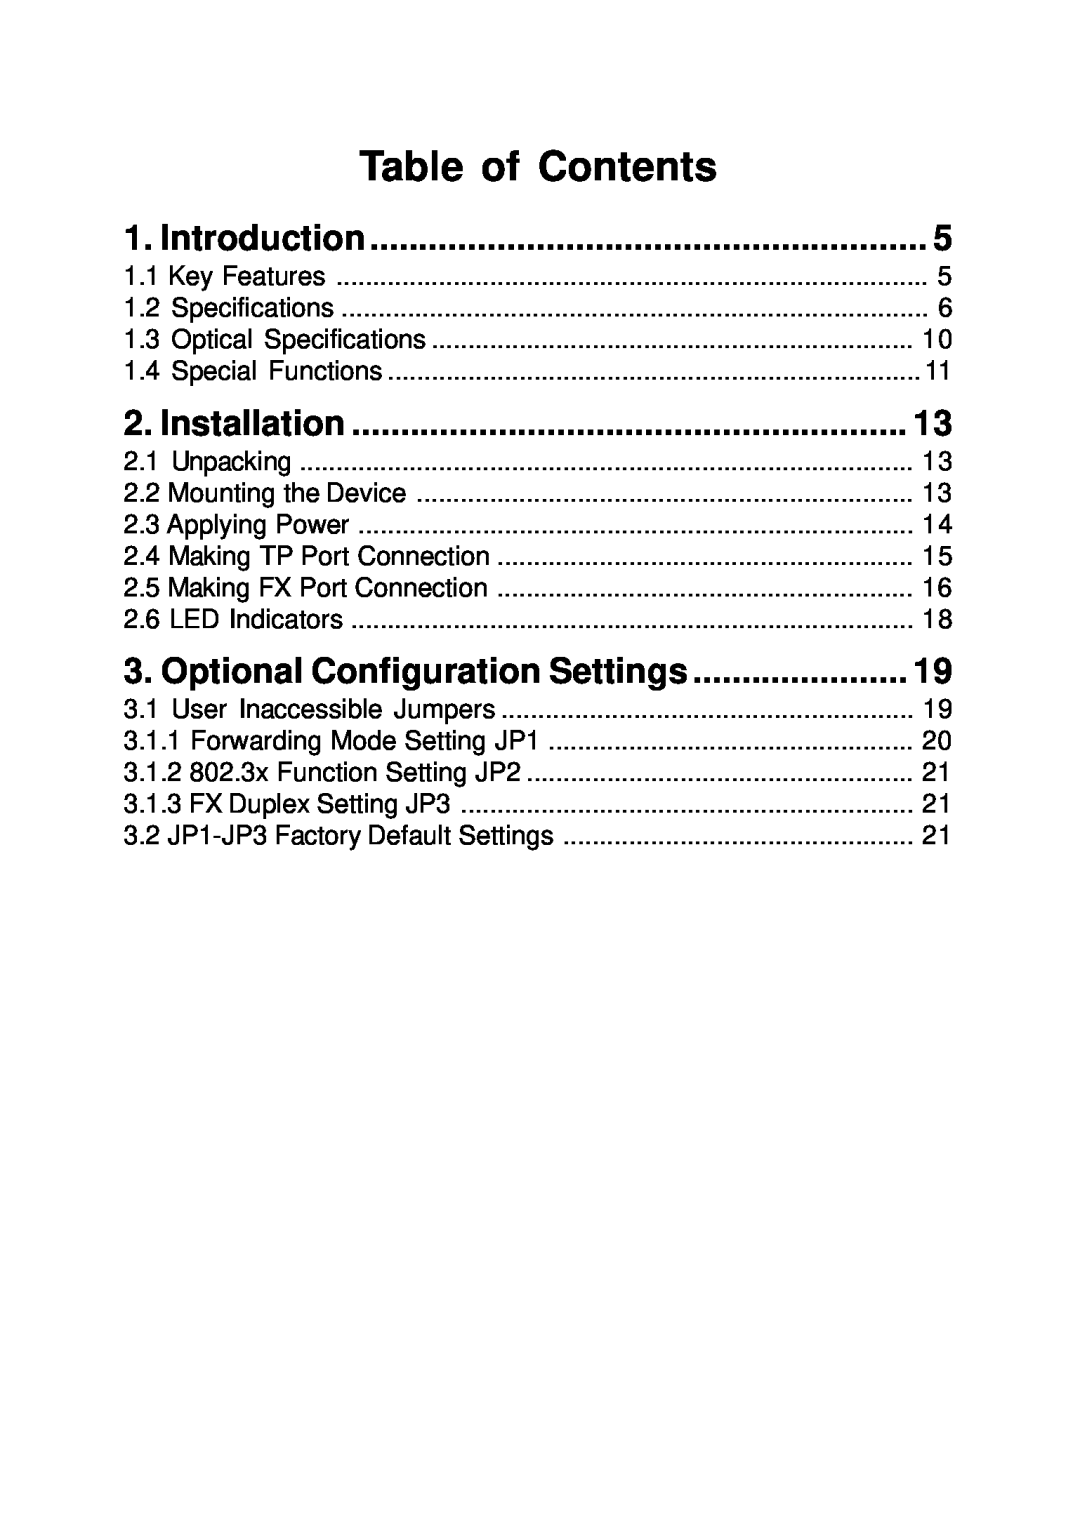 KTI Networks KC-300D manual Table of Contents, Introduction, Installation, Optional Configuration Settings 